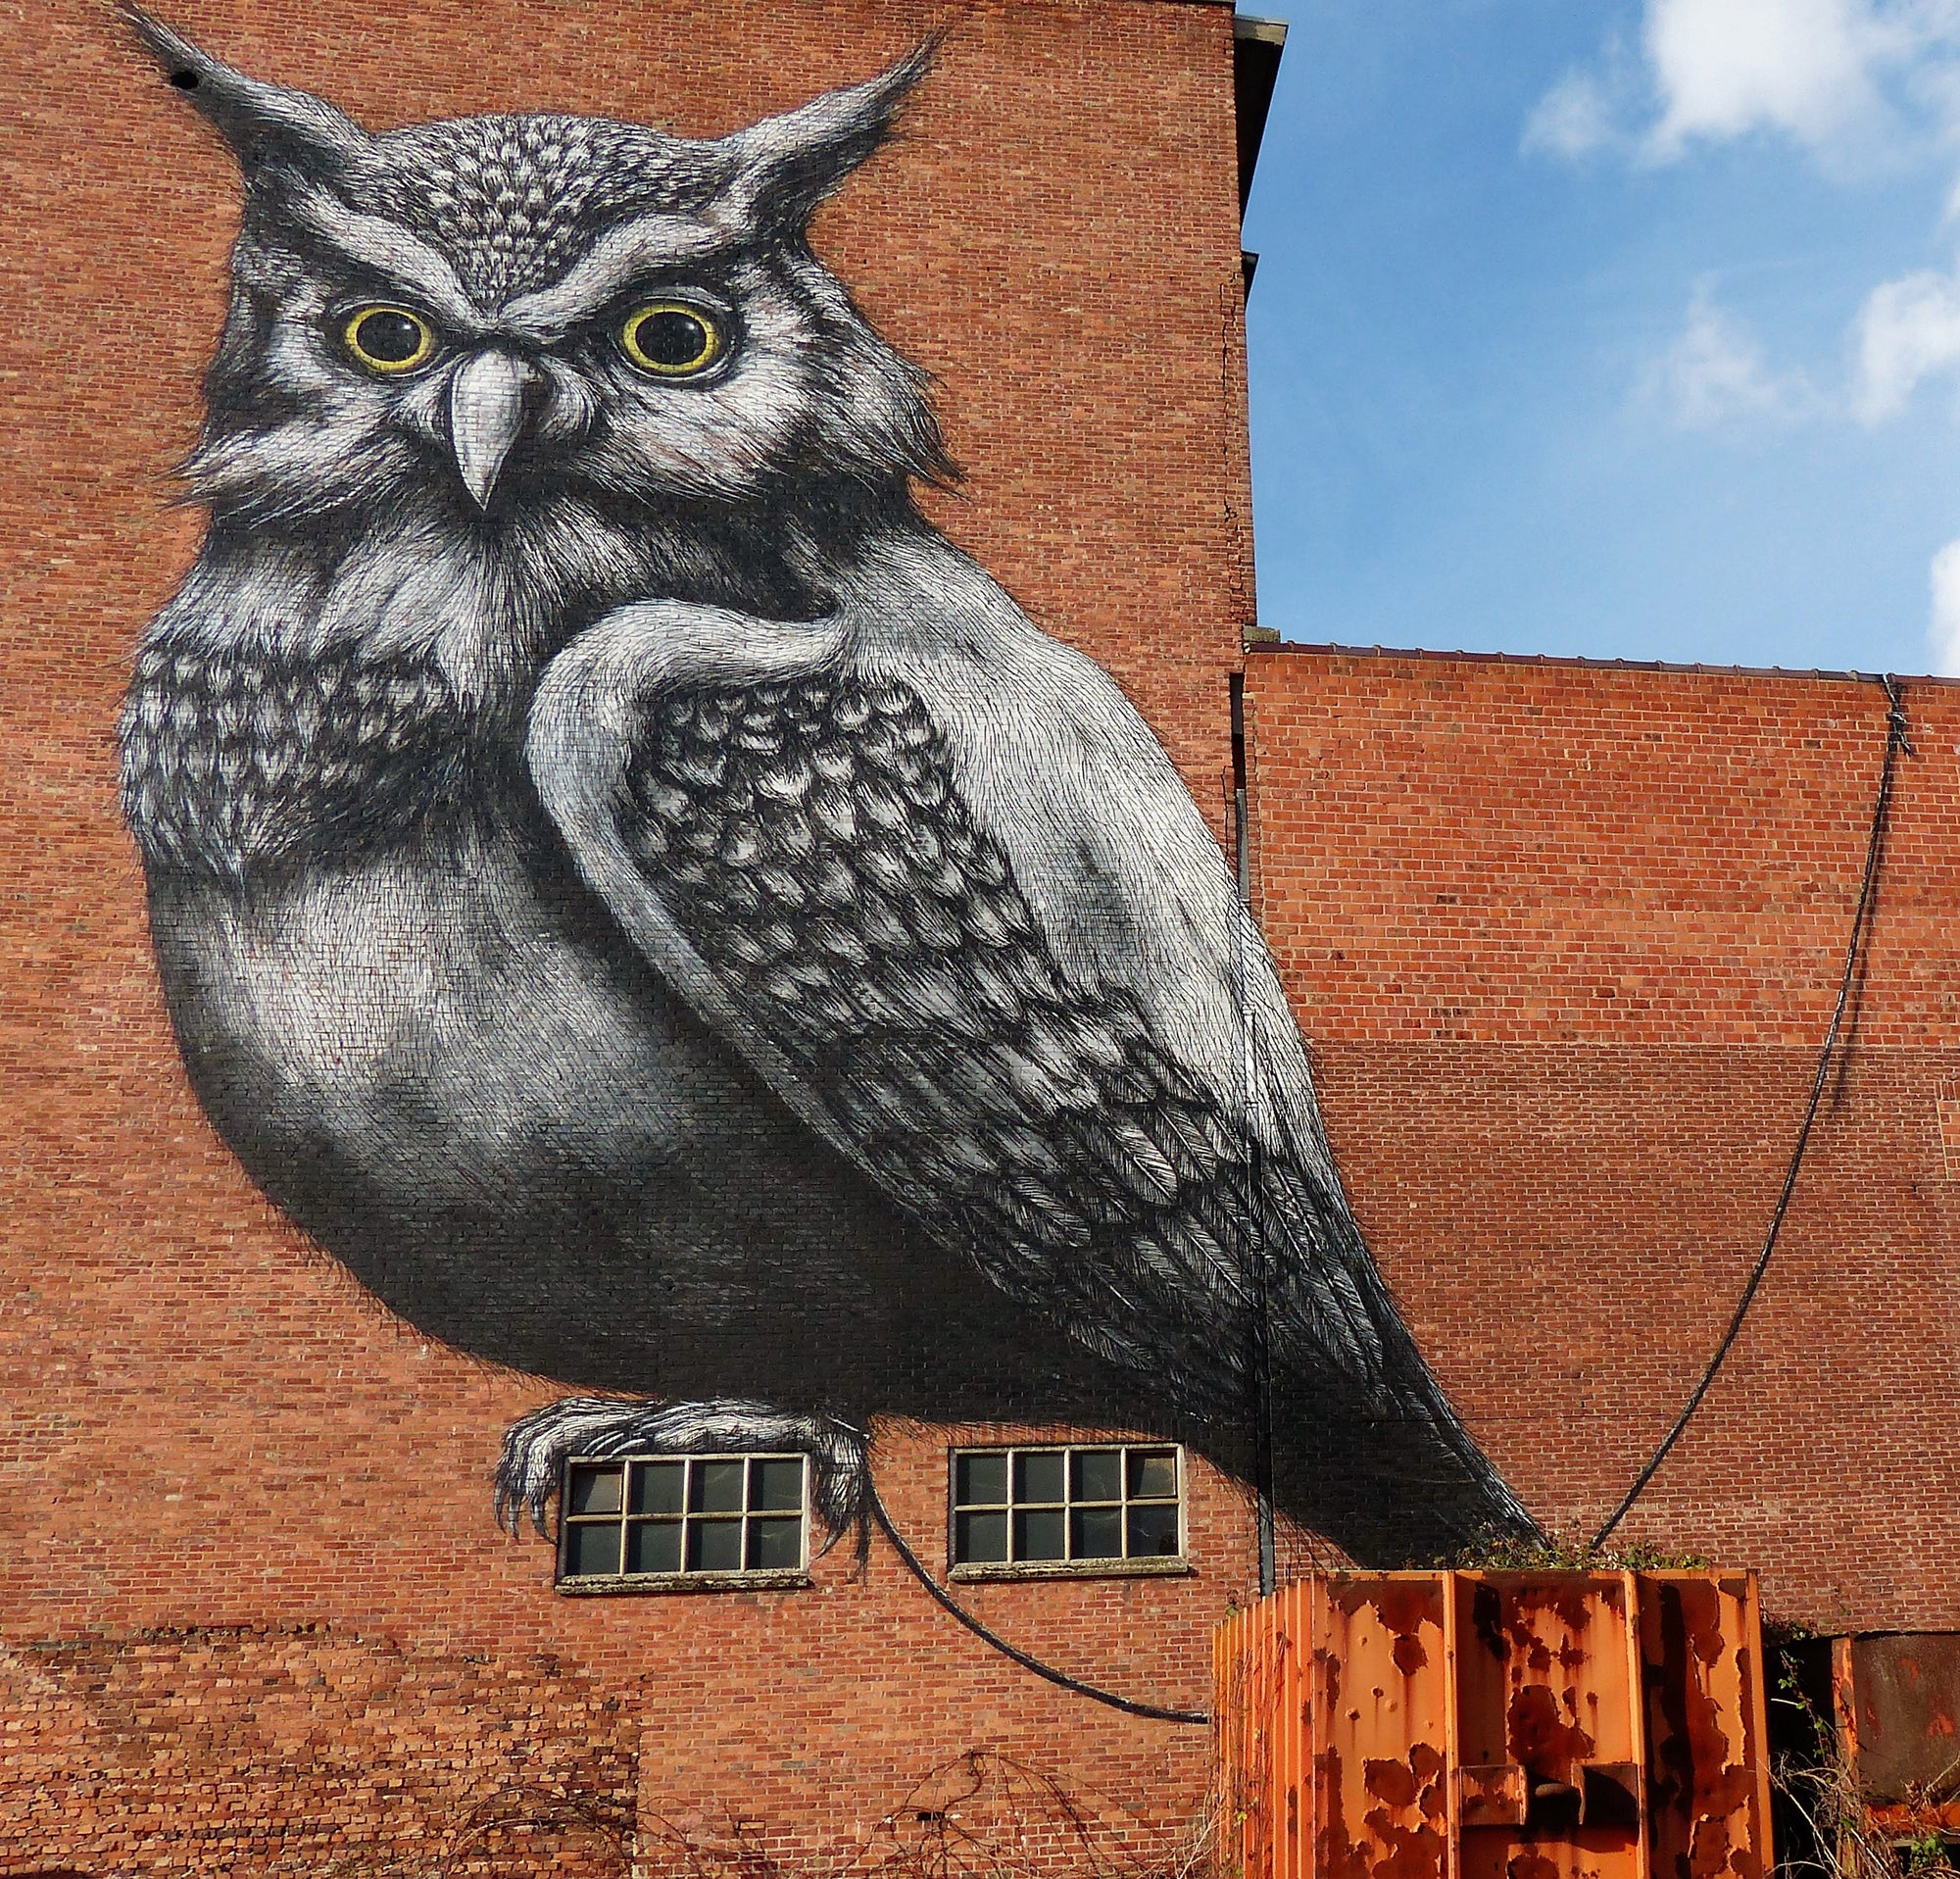 Artist Series: The Artwork of ROA, From Streets to Gallery